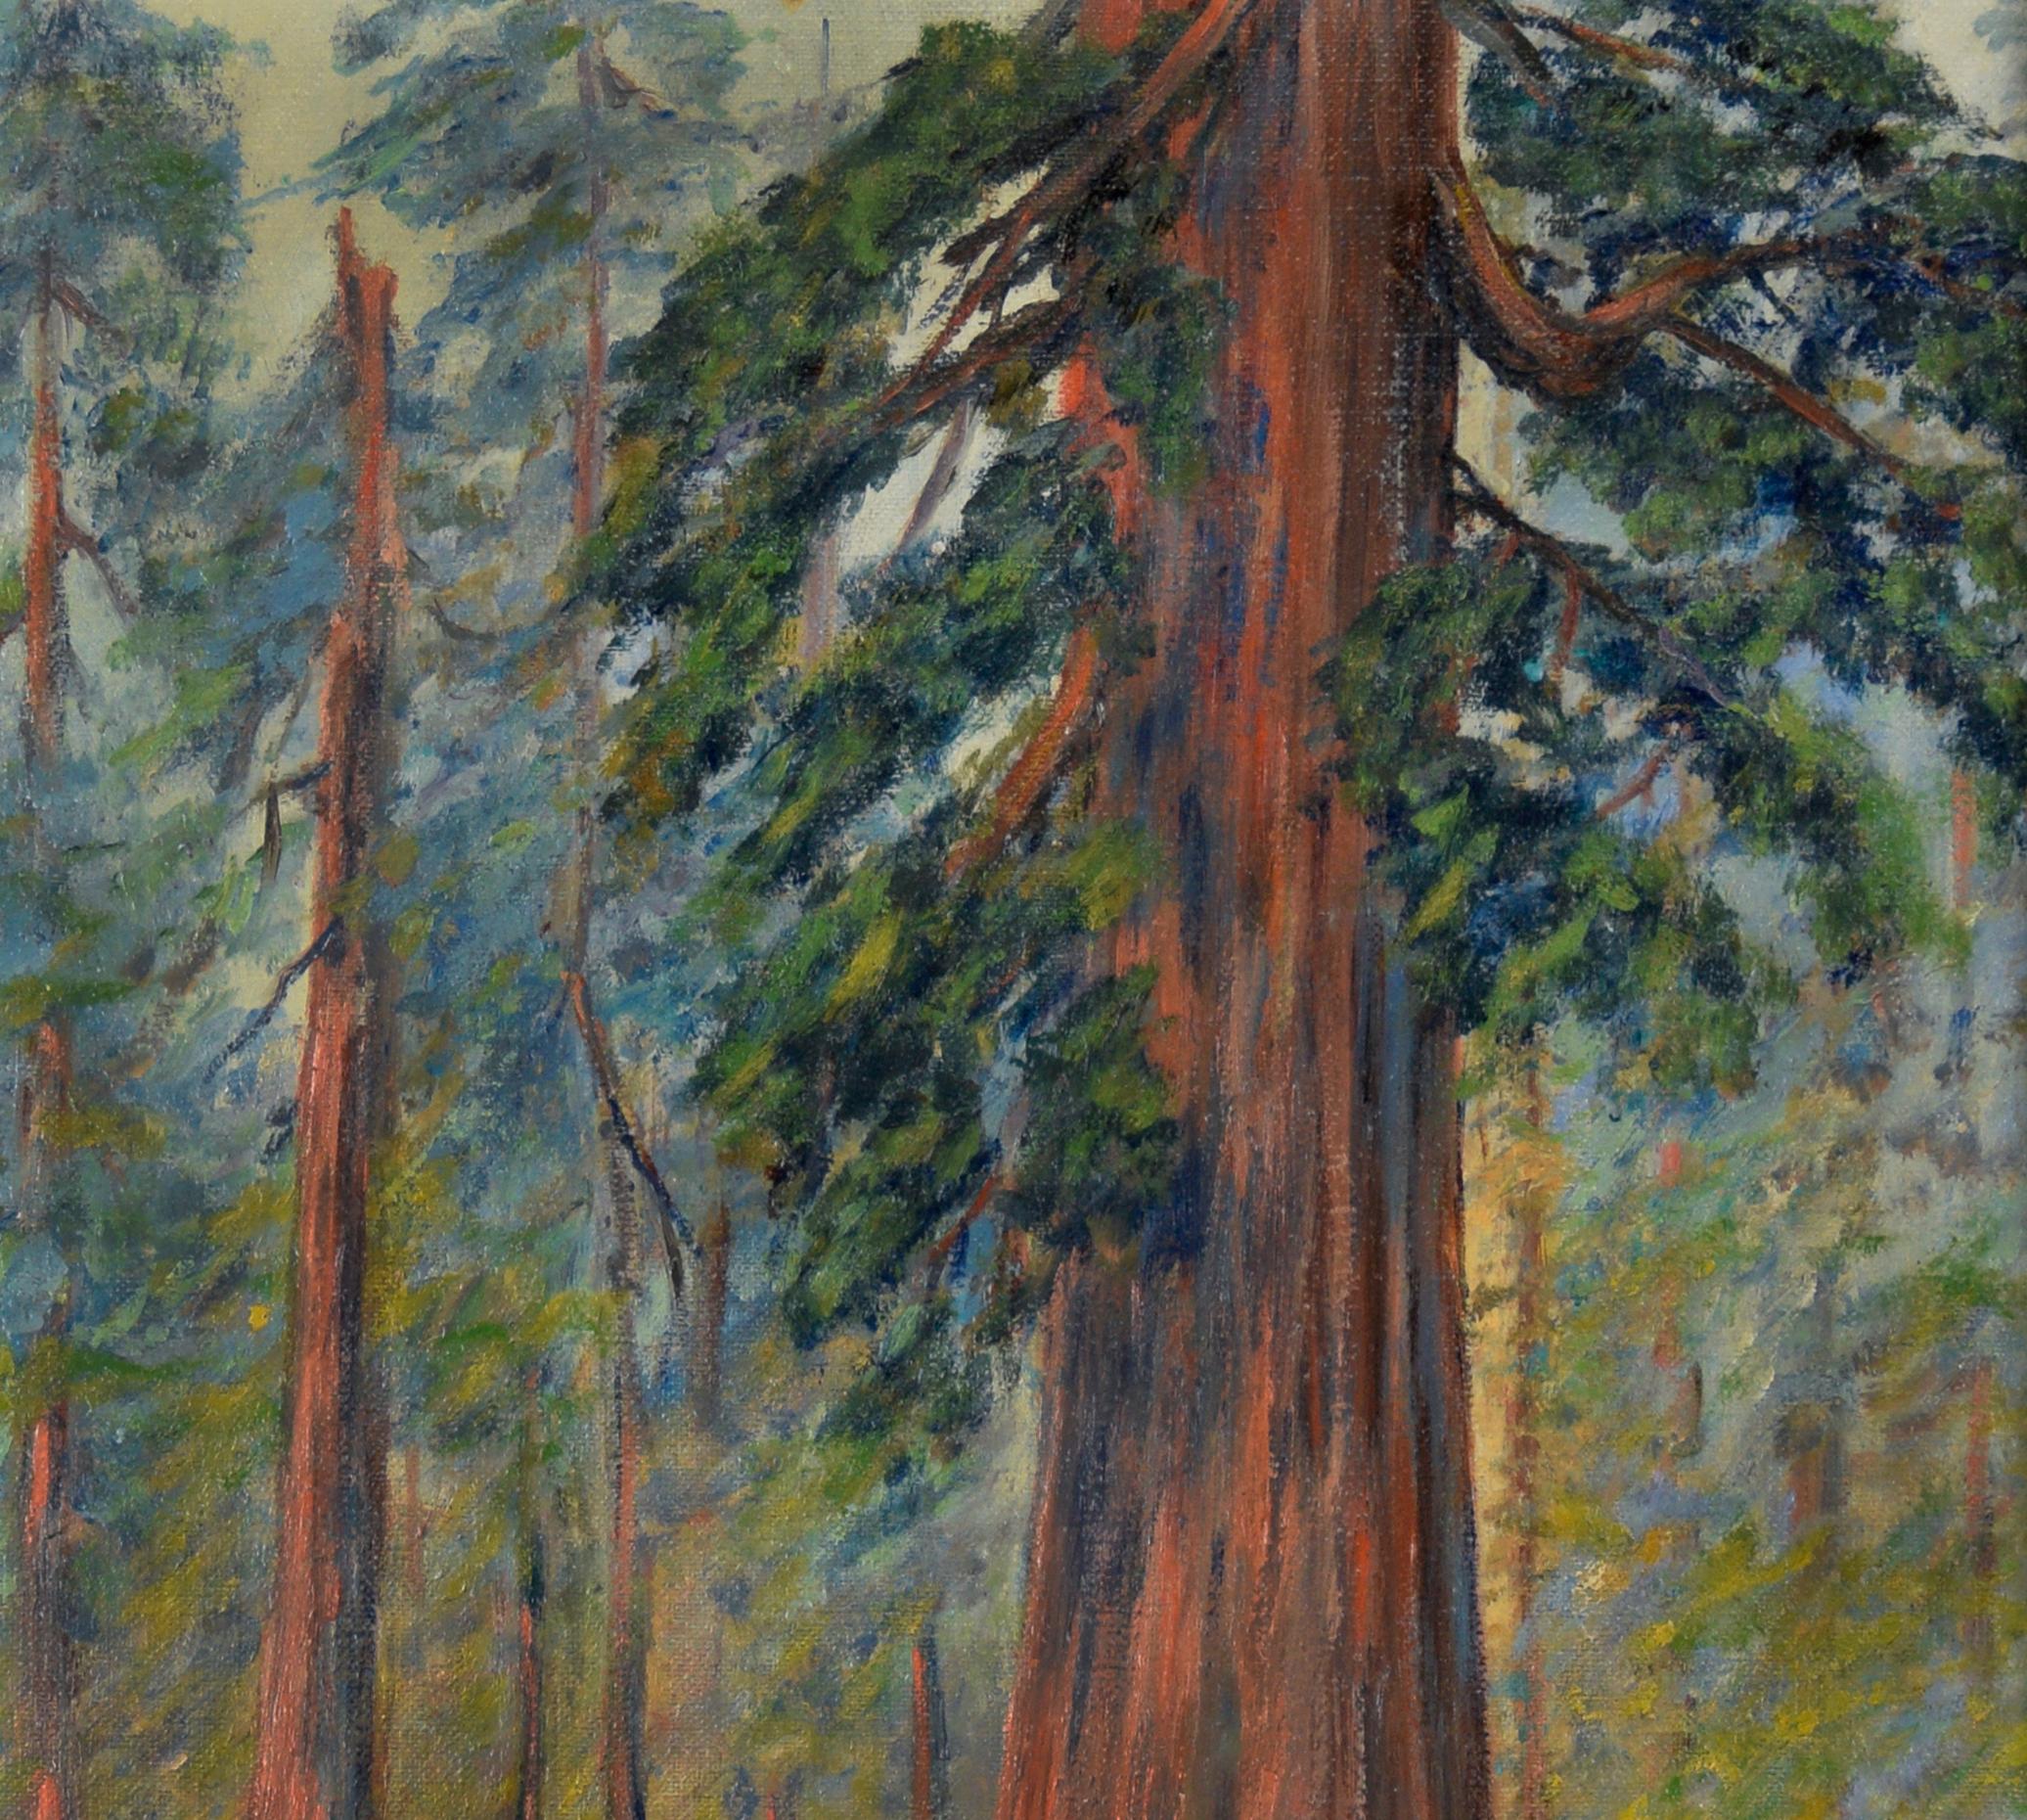 Through The Redwoods - American Impressionist

American Impressionist oil painting depicting a forest of California redwood trees. A giant redwood tree stands out as the focal point, with branches of vibrant dark green leaves, while different hues